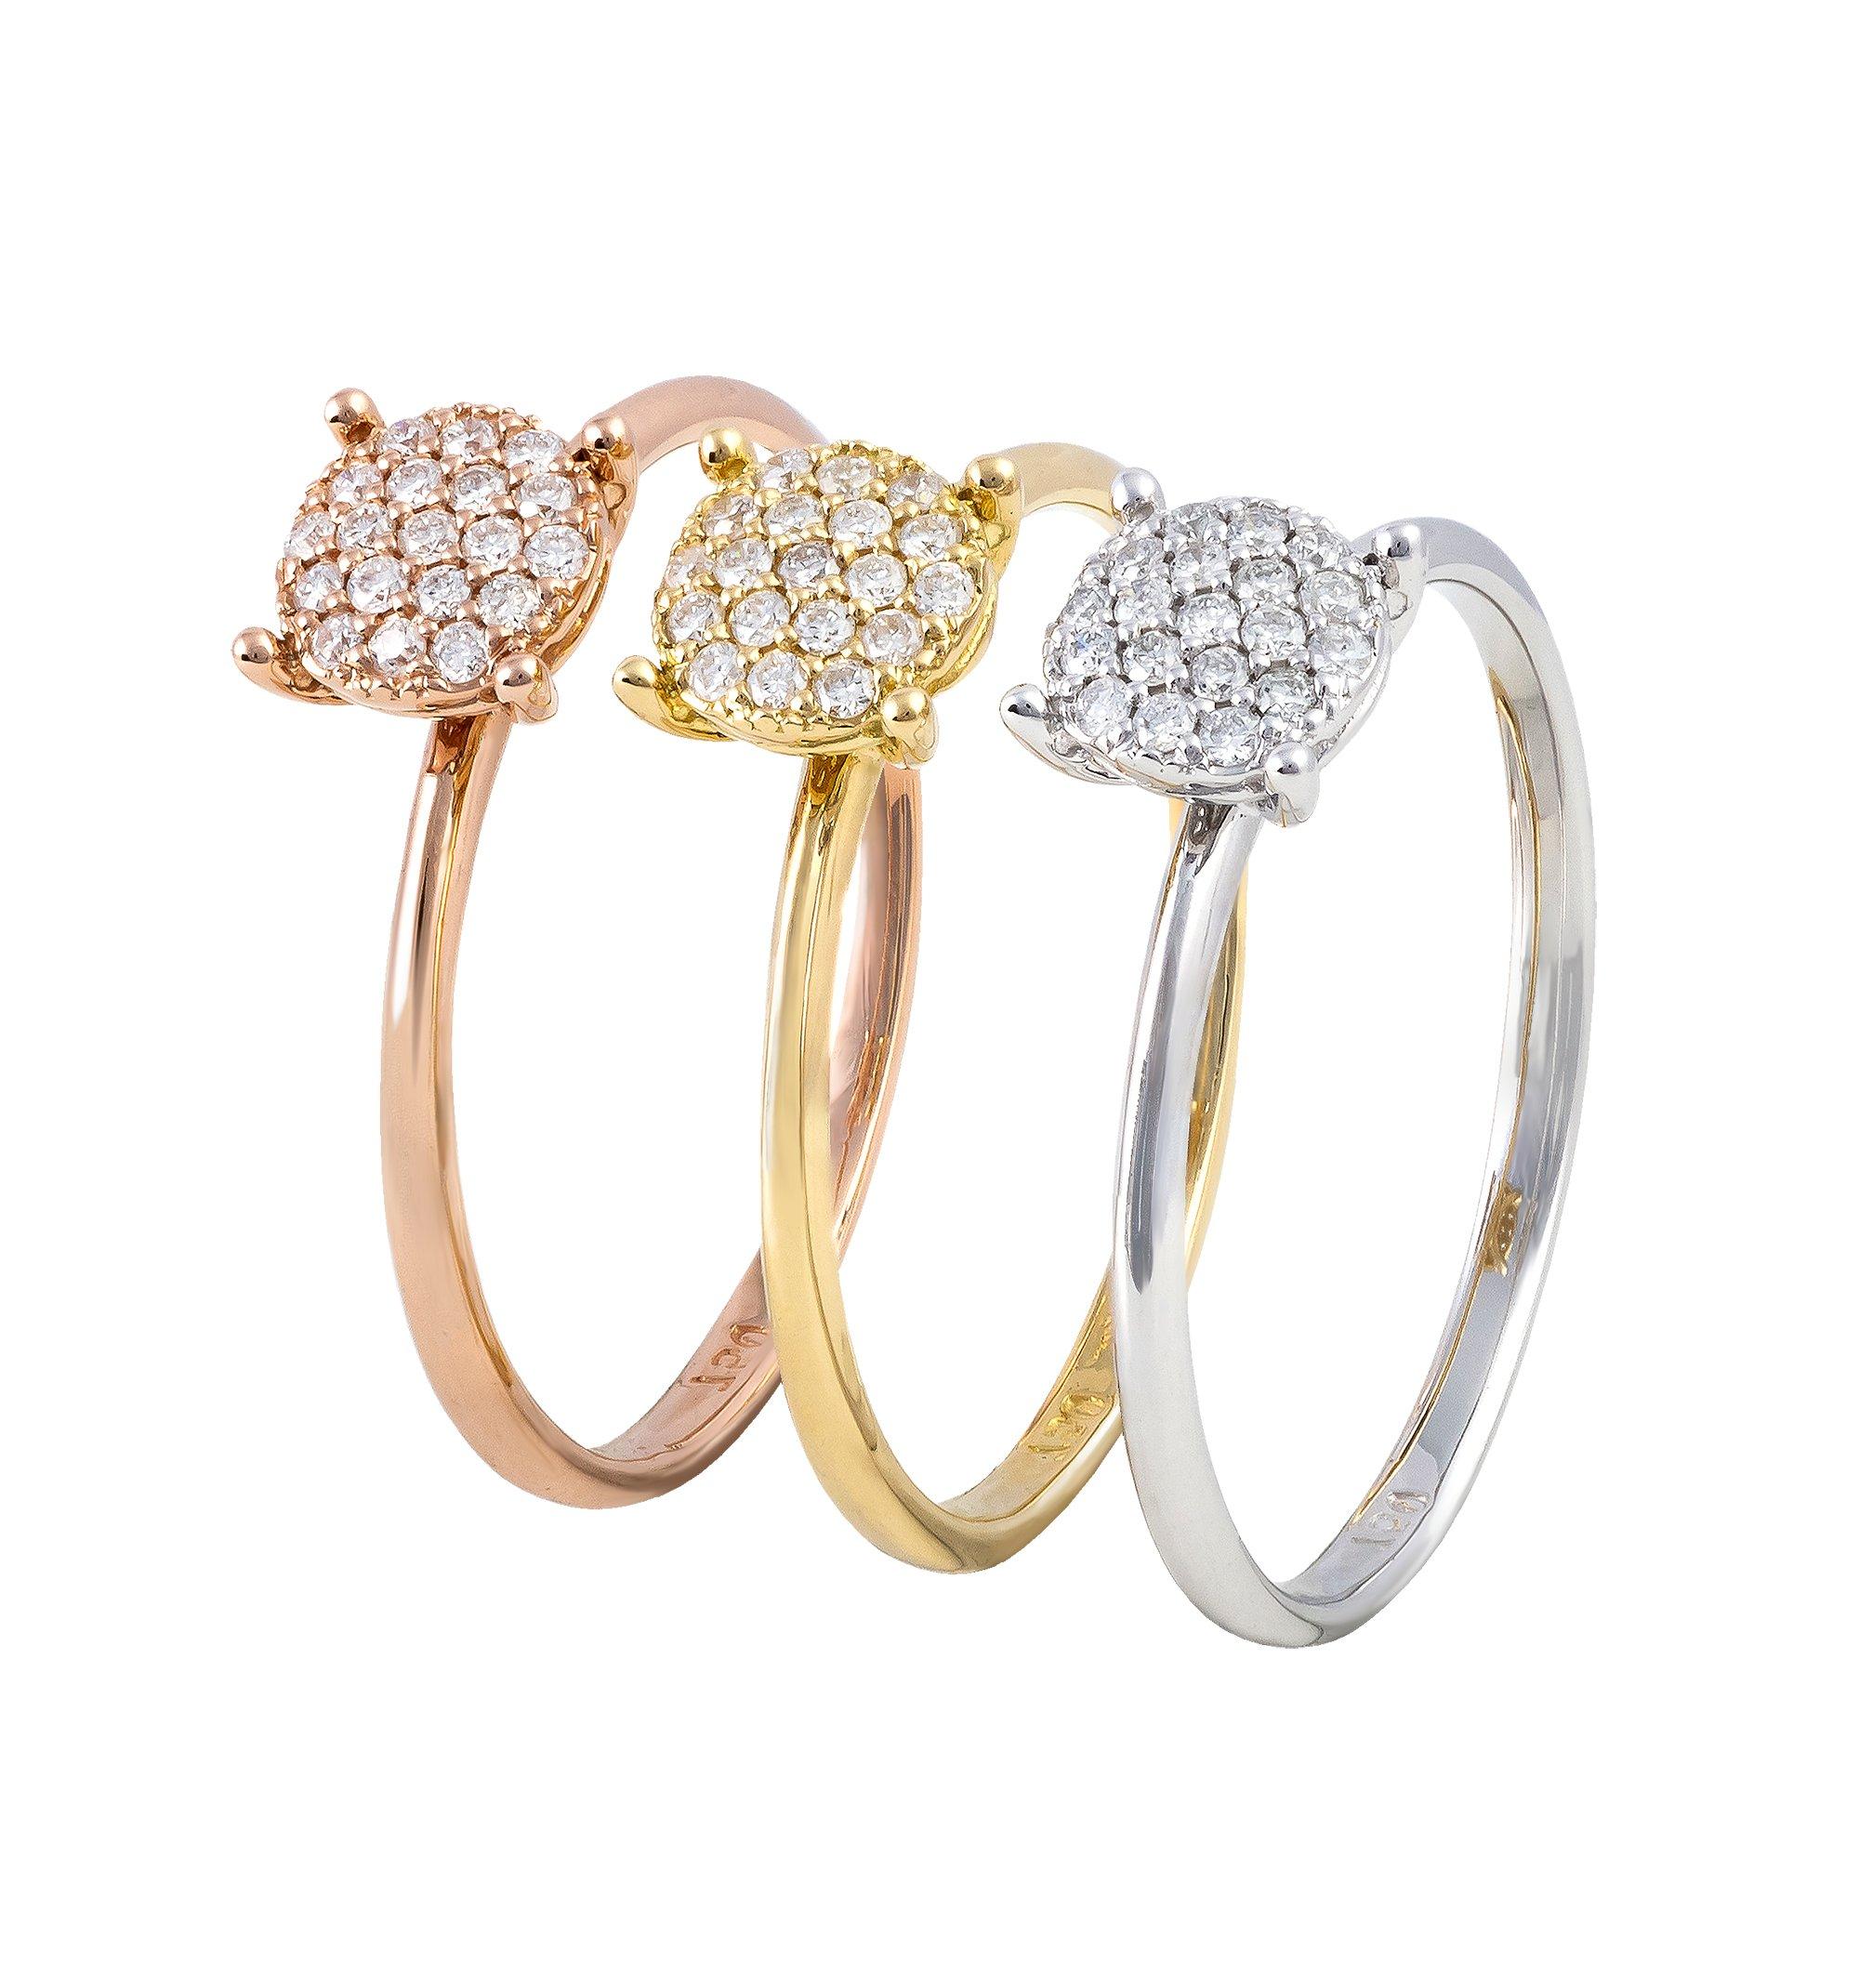 Round Cut Set of 3 Diamond Rings 18K Rose, White and Yellow Gold Diamond for Her For Sale